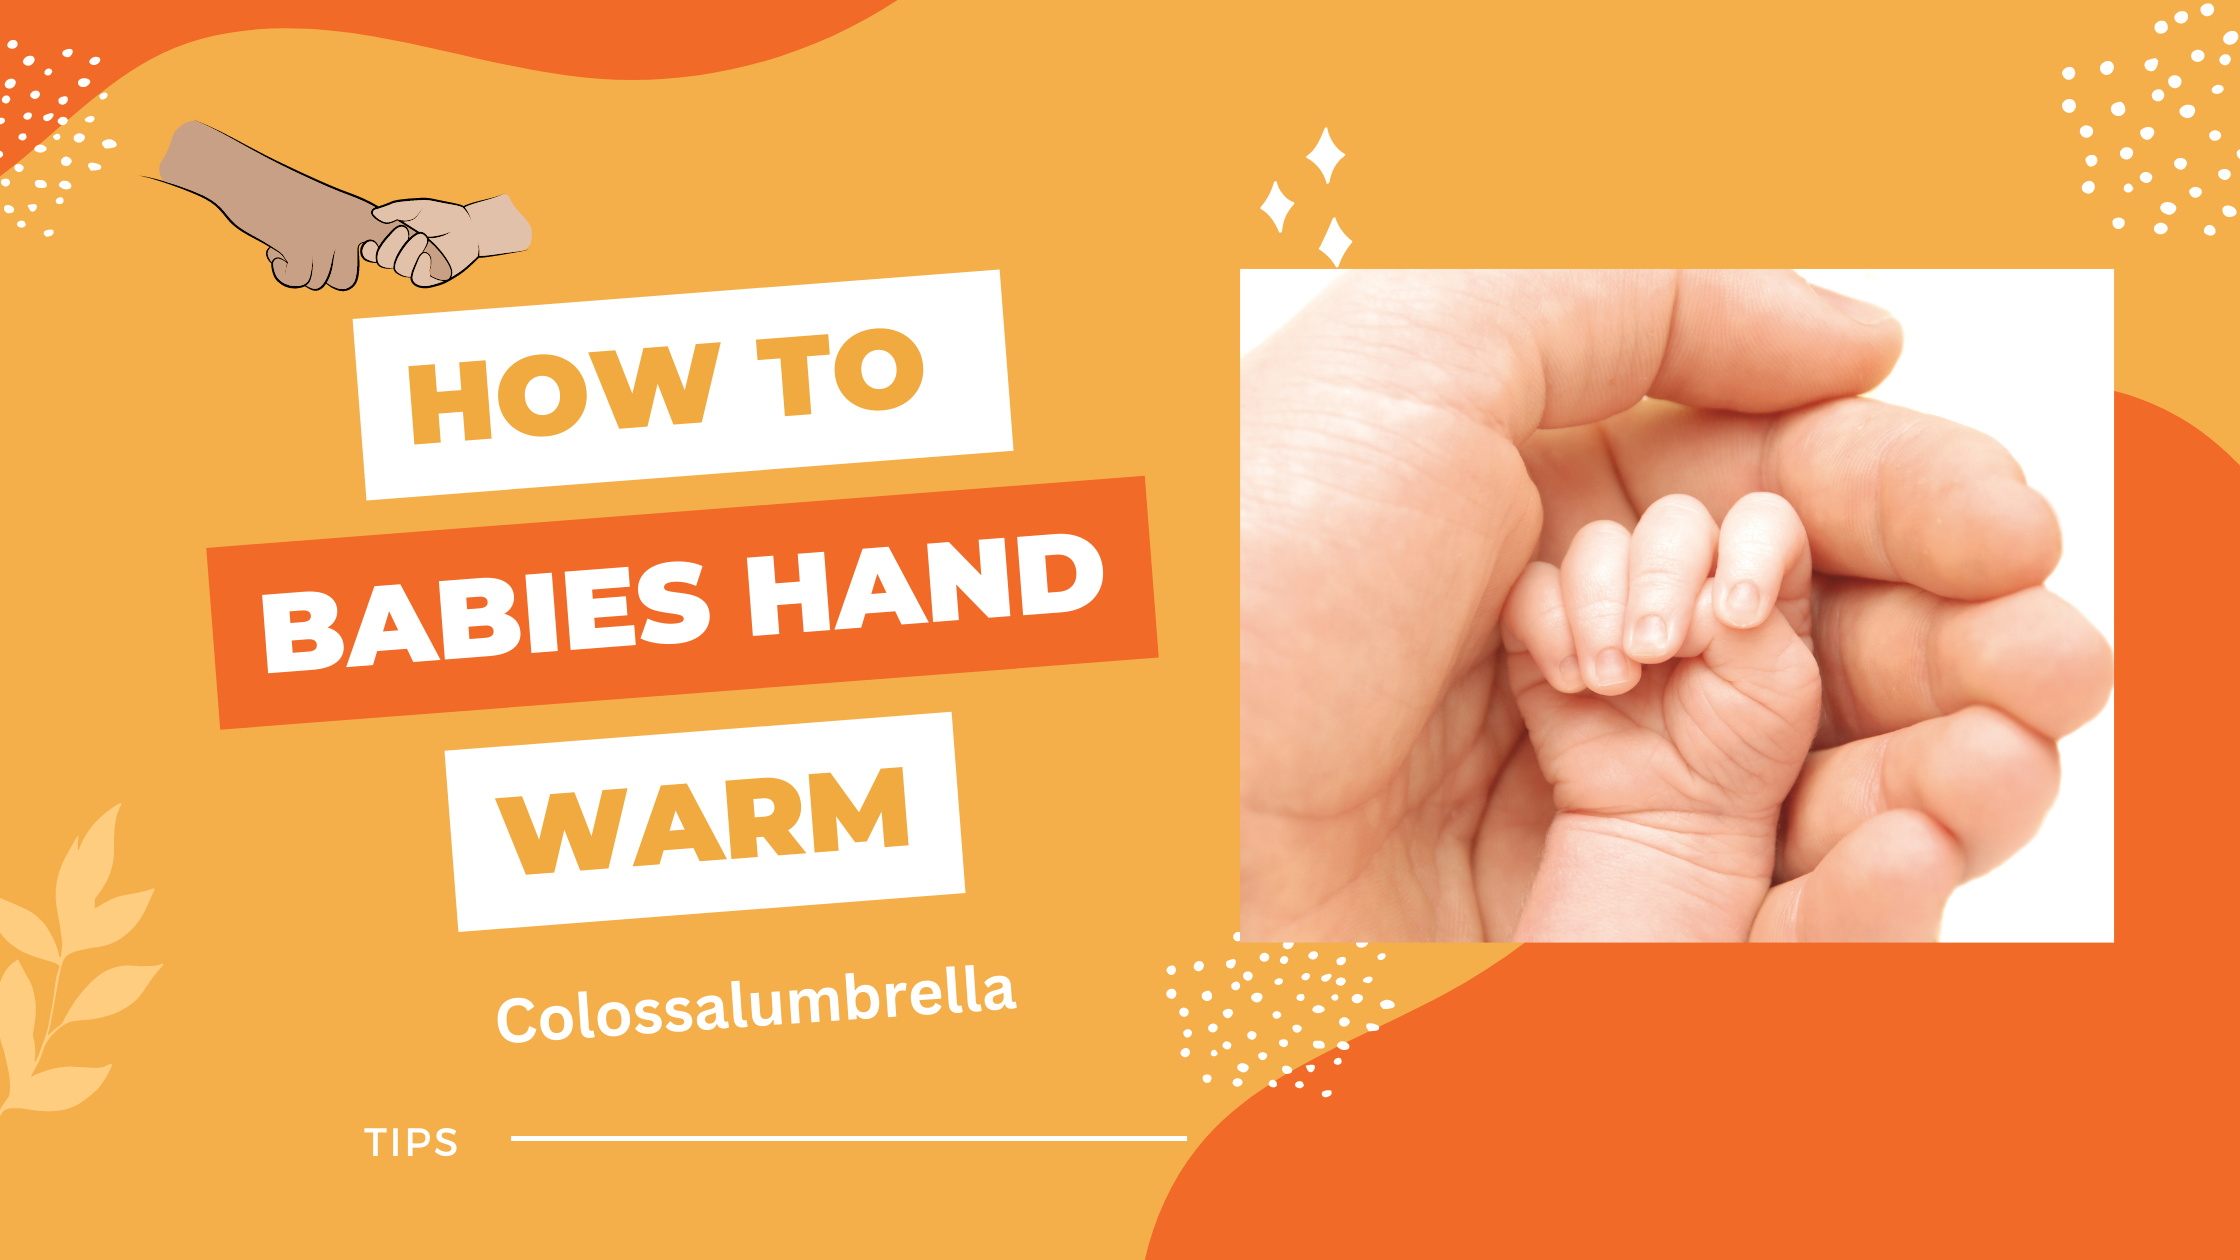 How to keep babies hands warm at night by Colossalumbrella